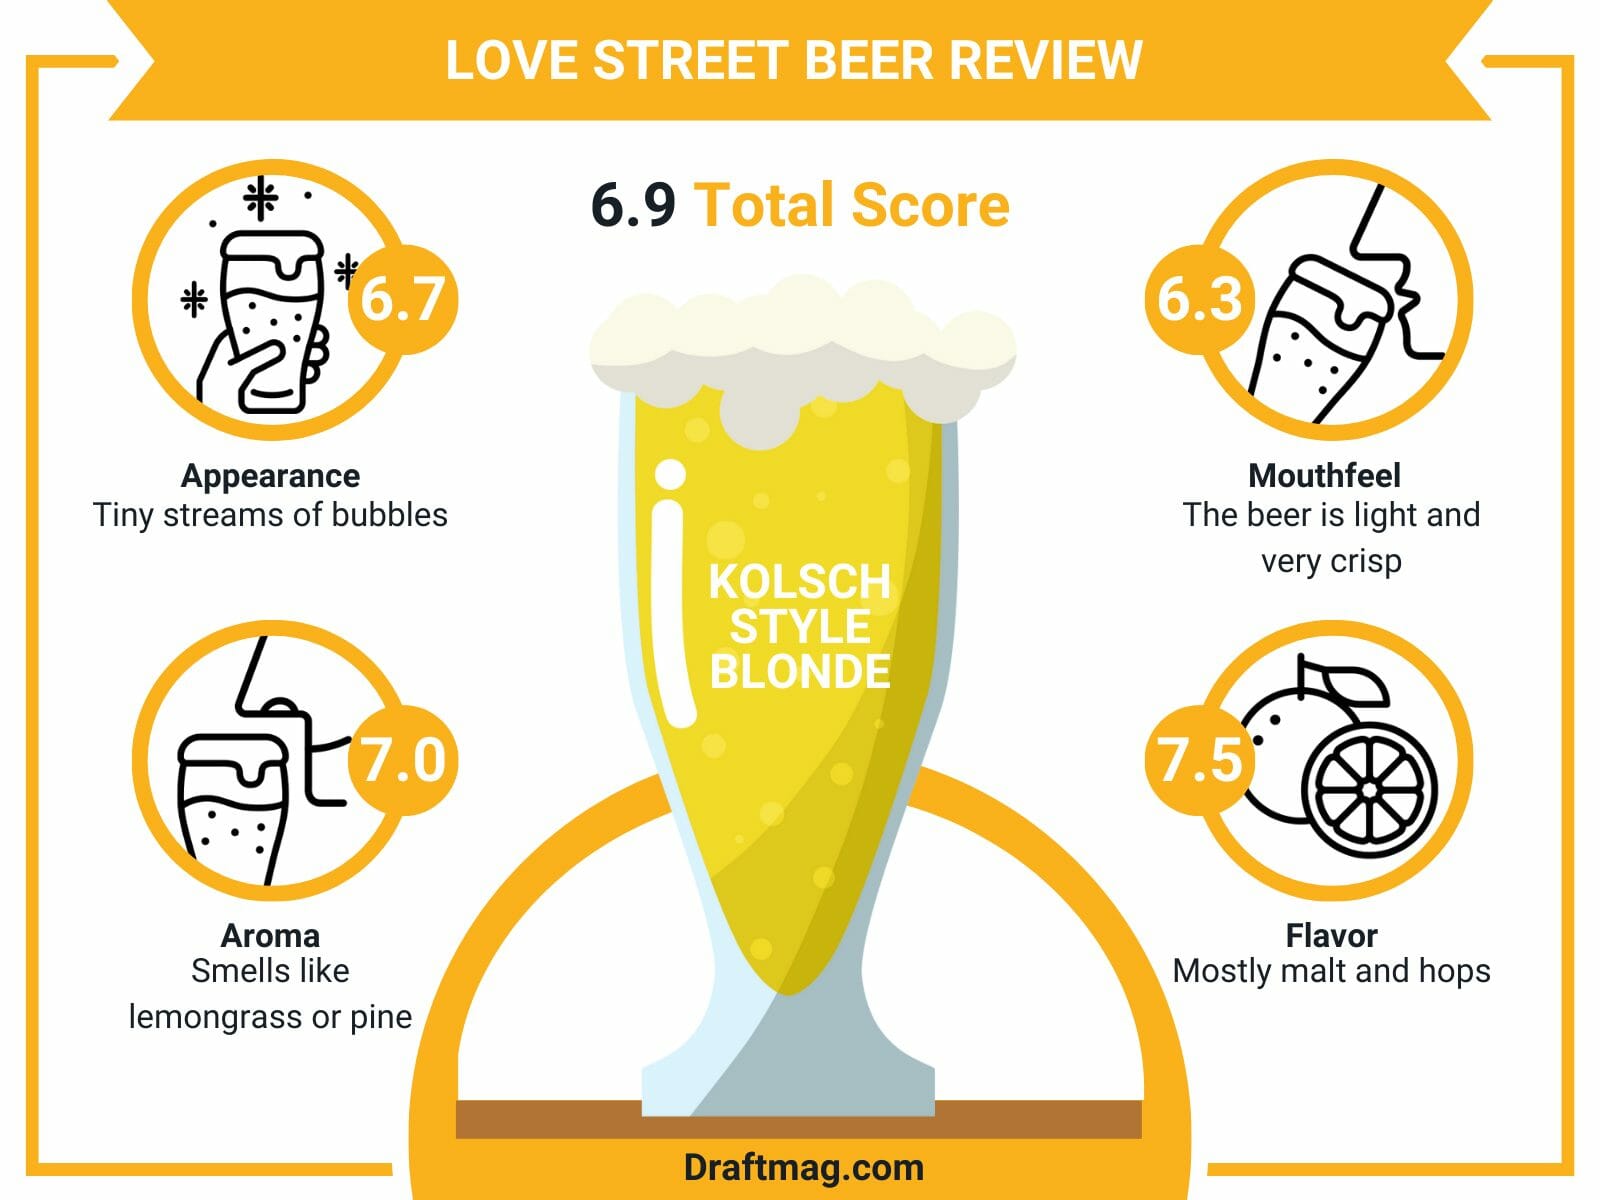 Love street beer review infographic